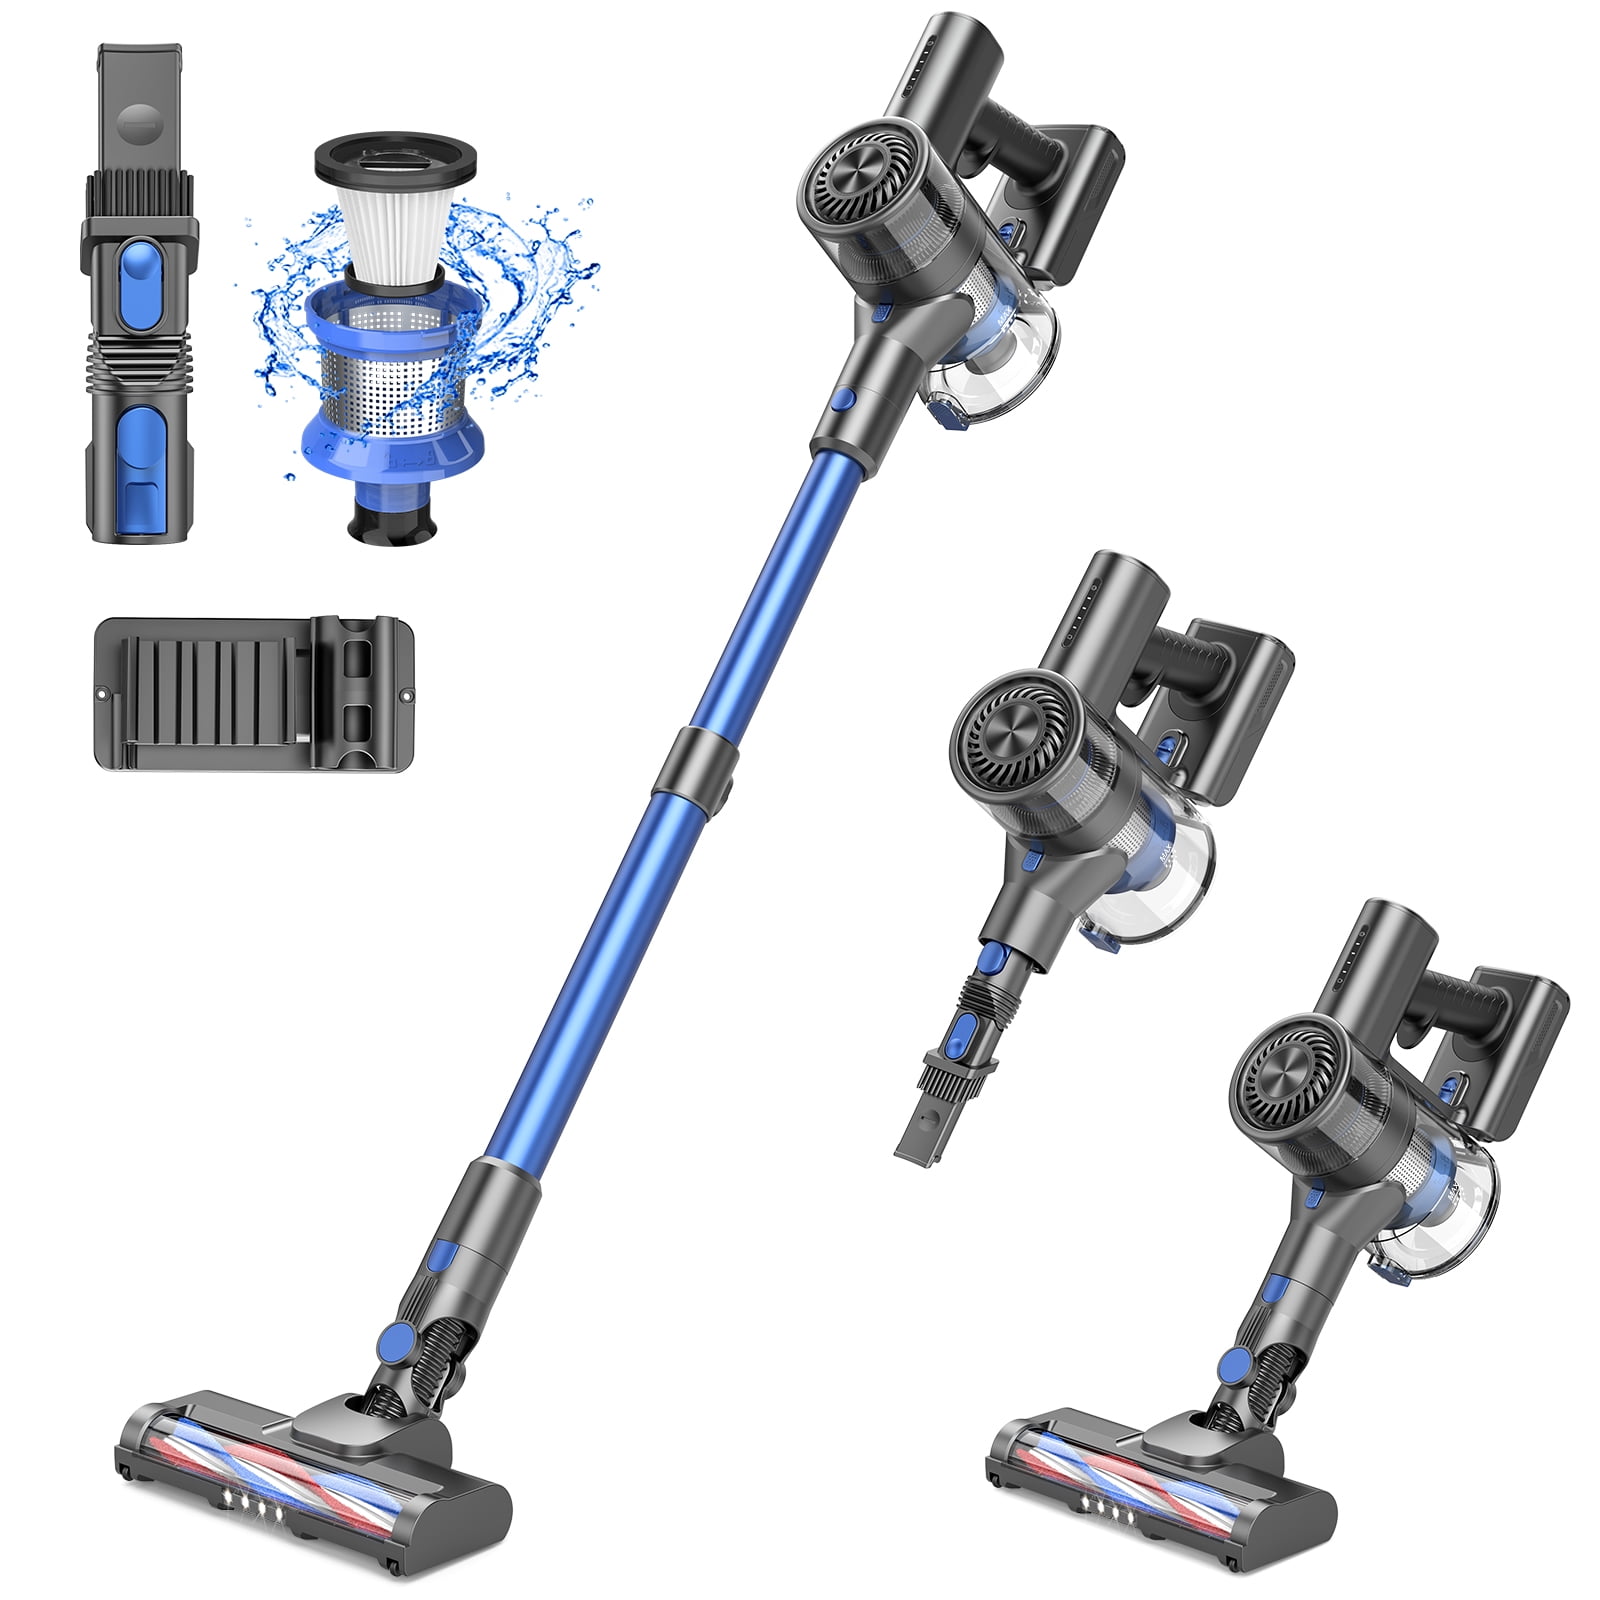 Changed my vacuuming game!': Save $100 on this cordless Dyson — but only  for today